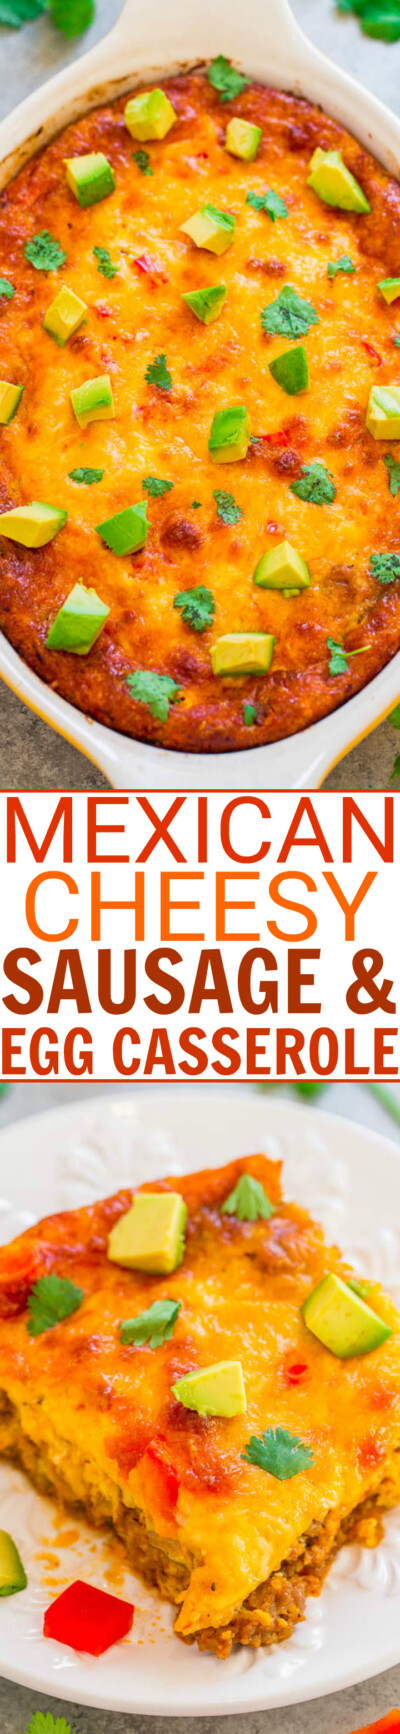 Mexican Cheesy Sausage and Egg Casserole - Averie Cooks